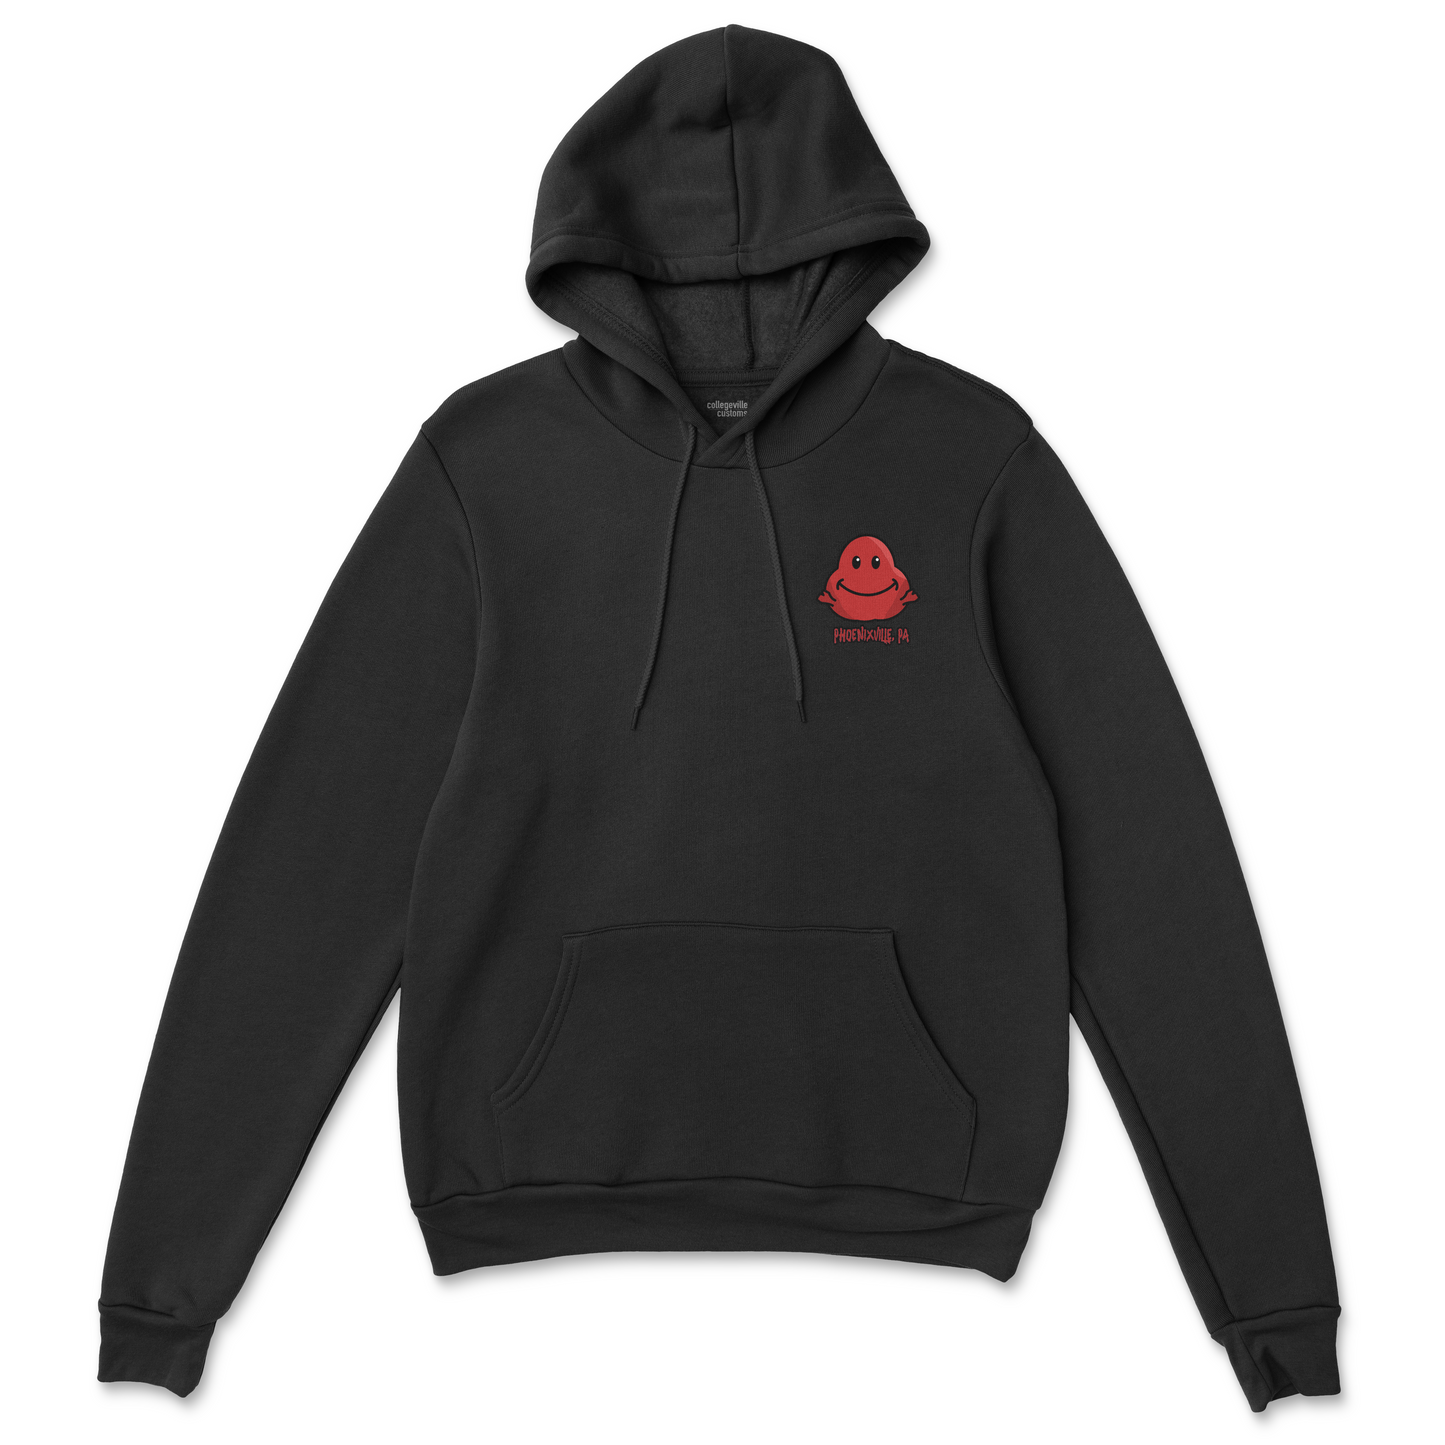 Blobby 2023 Phoenixville Pullover Hoodie! – Nick Picts